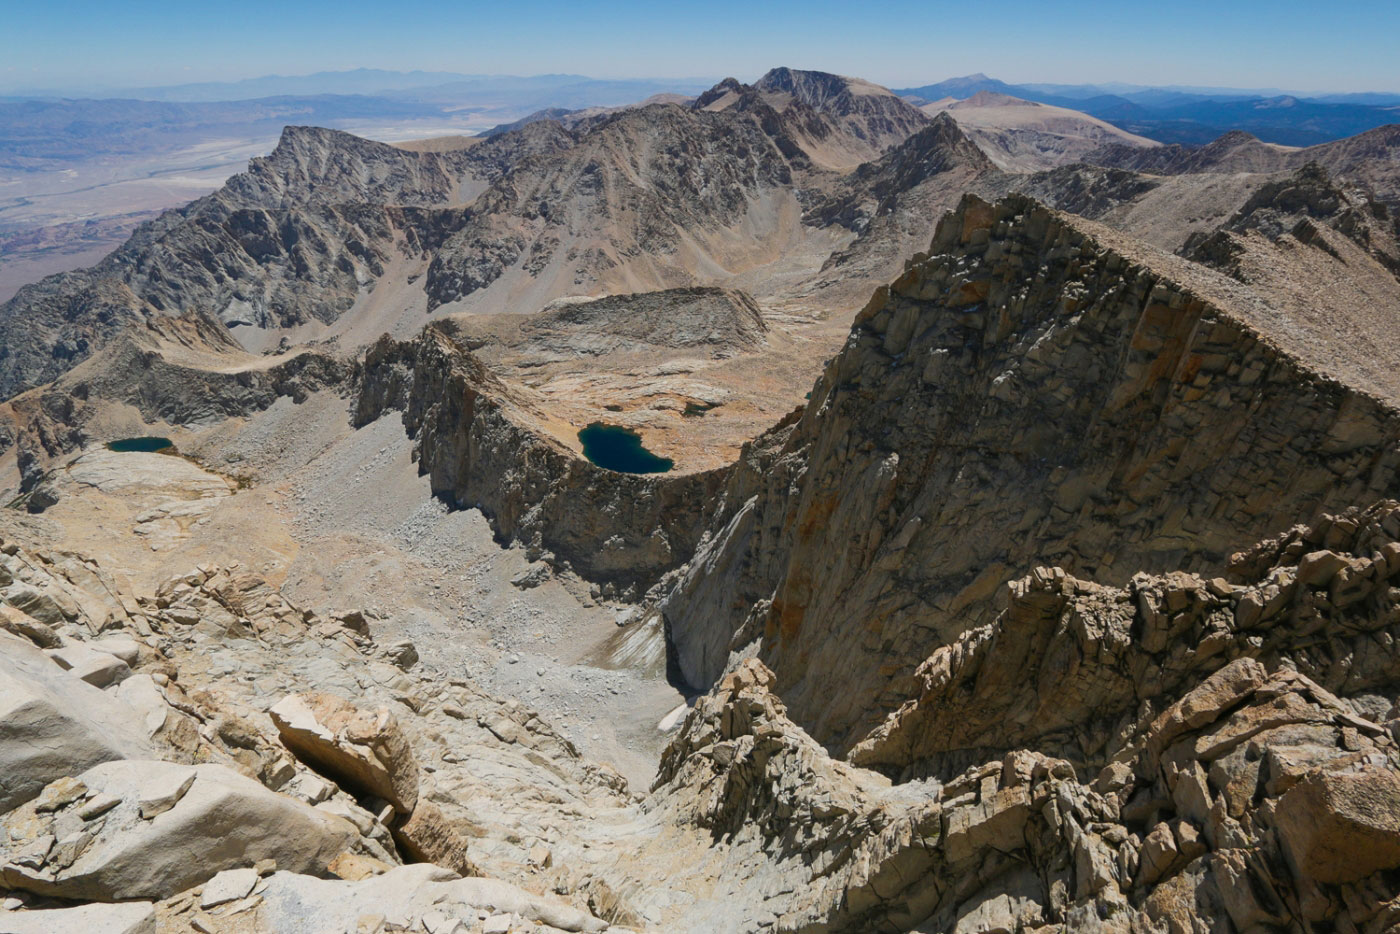 Hike Mount Whitney Trail in Inyo National Forest, California - Stav is Lost